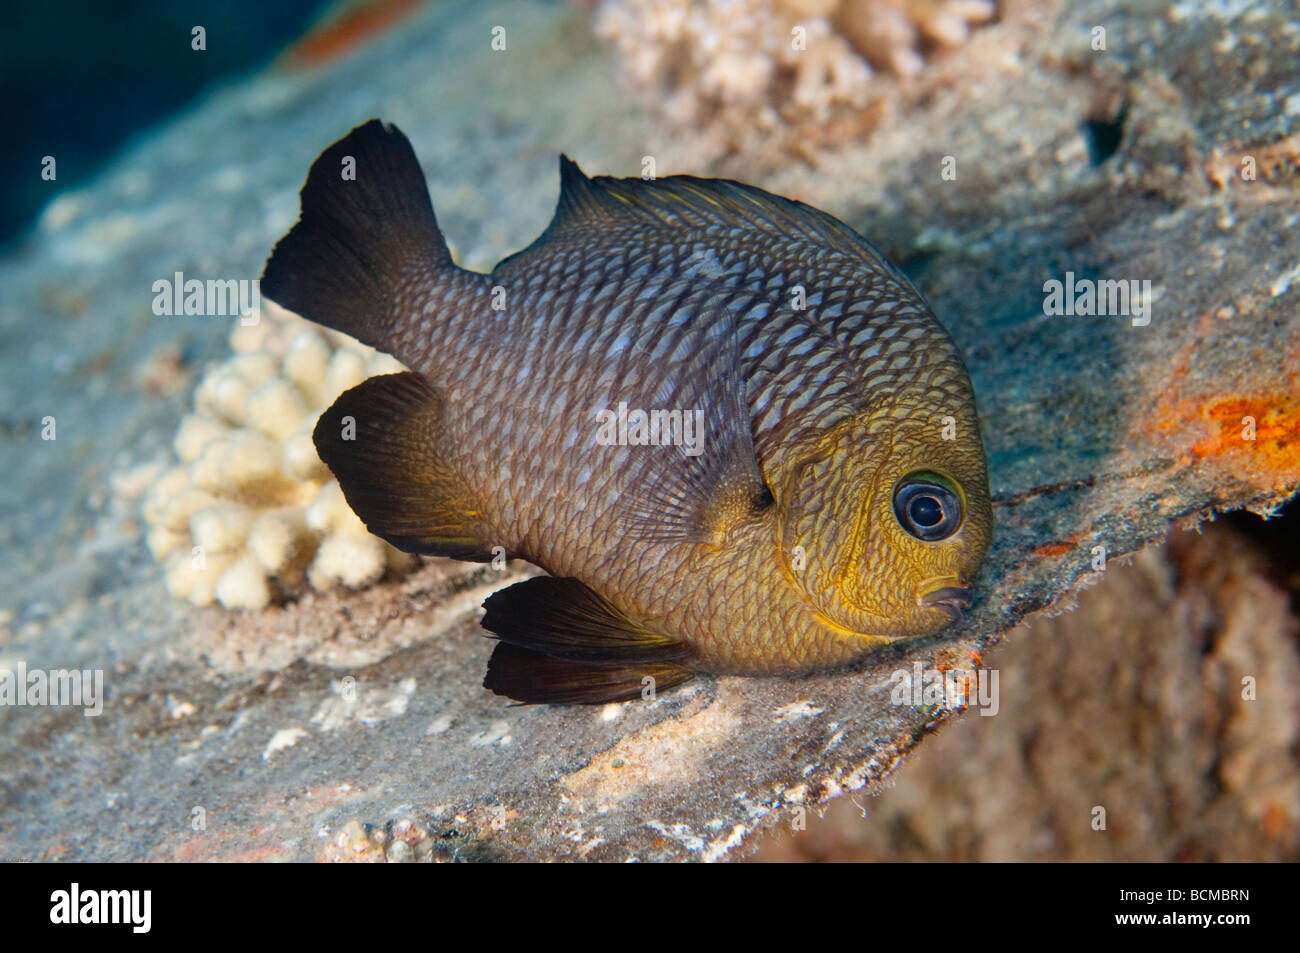 A three-spot dascyllus slips by the photographer as it makes its' rounds over the coral reef. Stock Photo